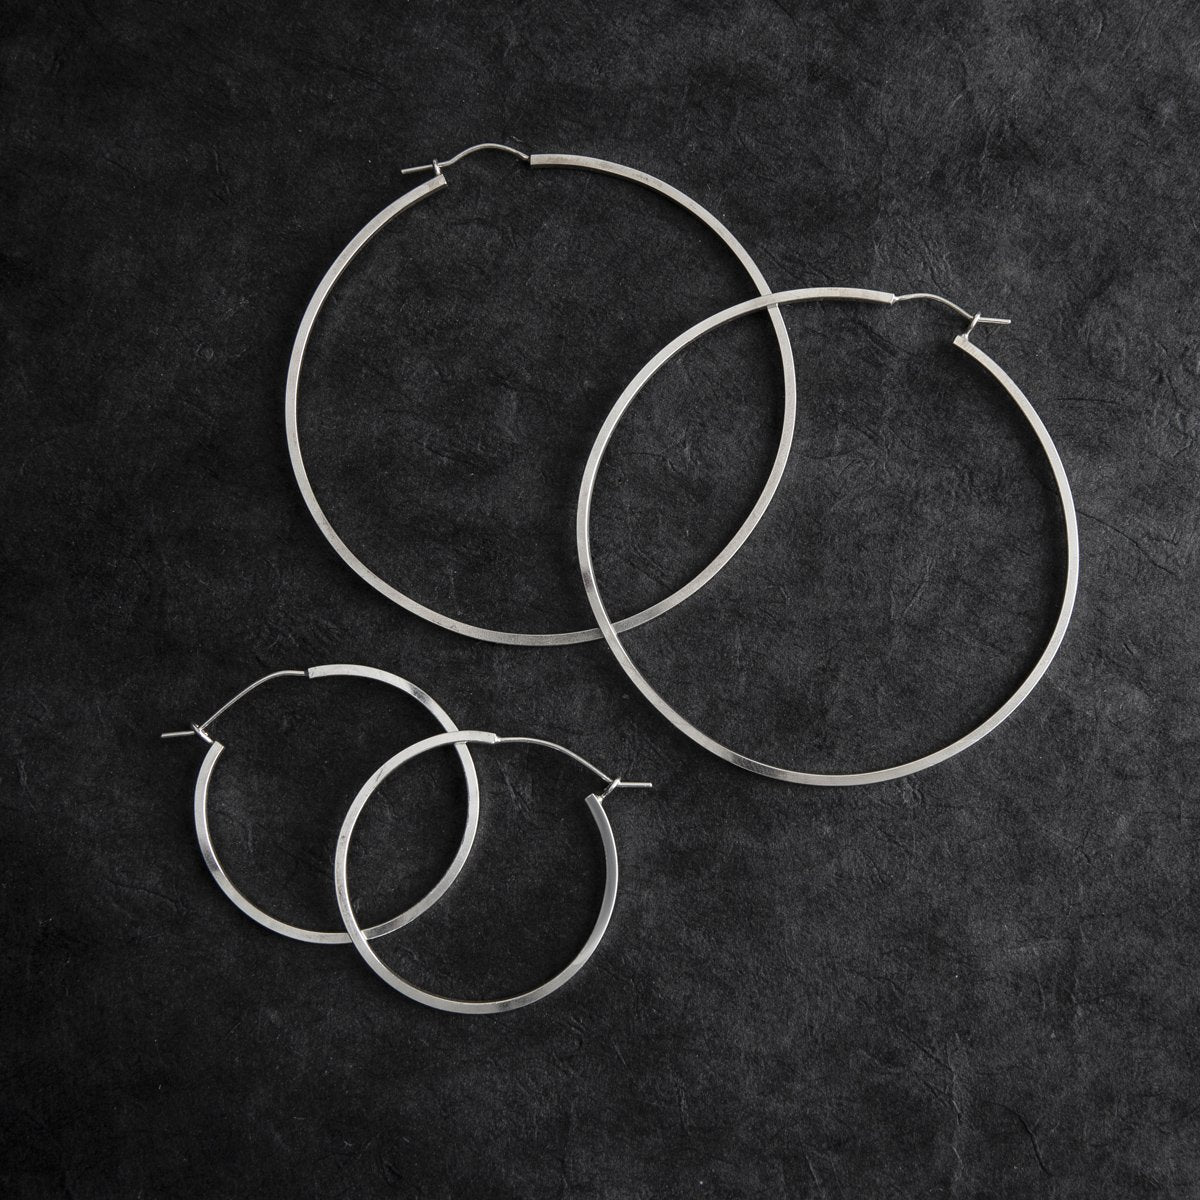 Glass Sky Jewelry - Square Hoops - Sterling Silver Handmade Minimal Jewelry